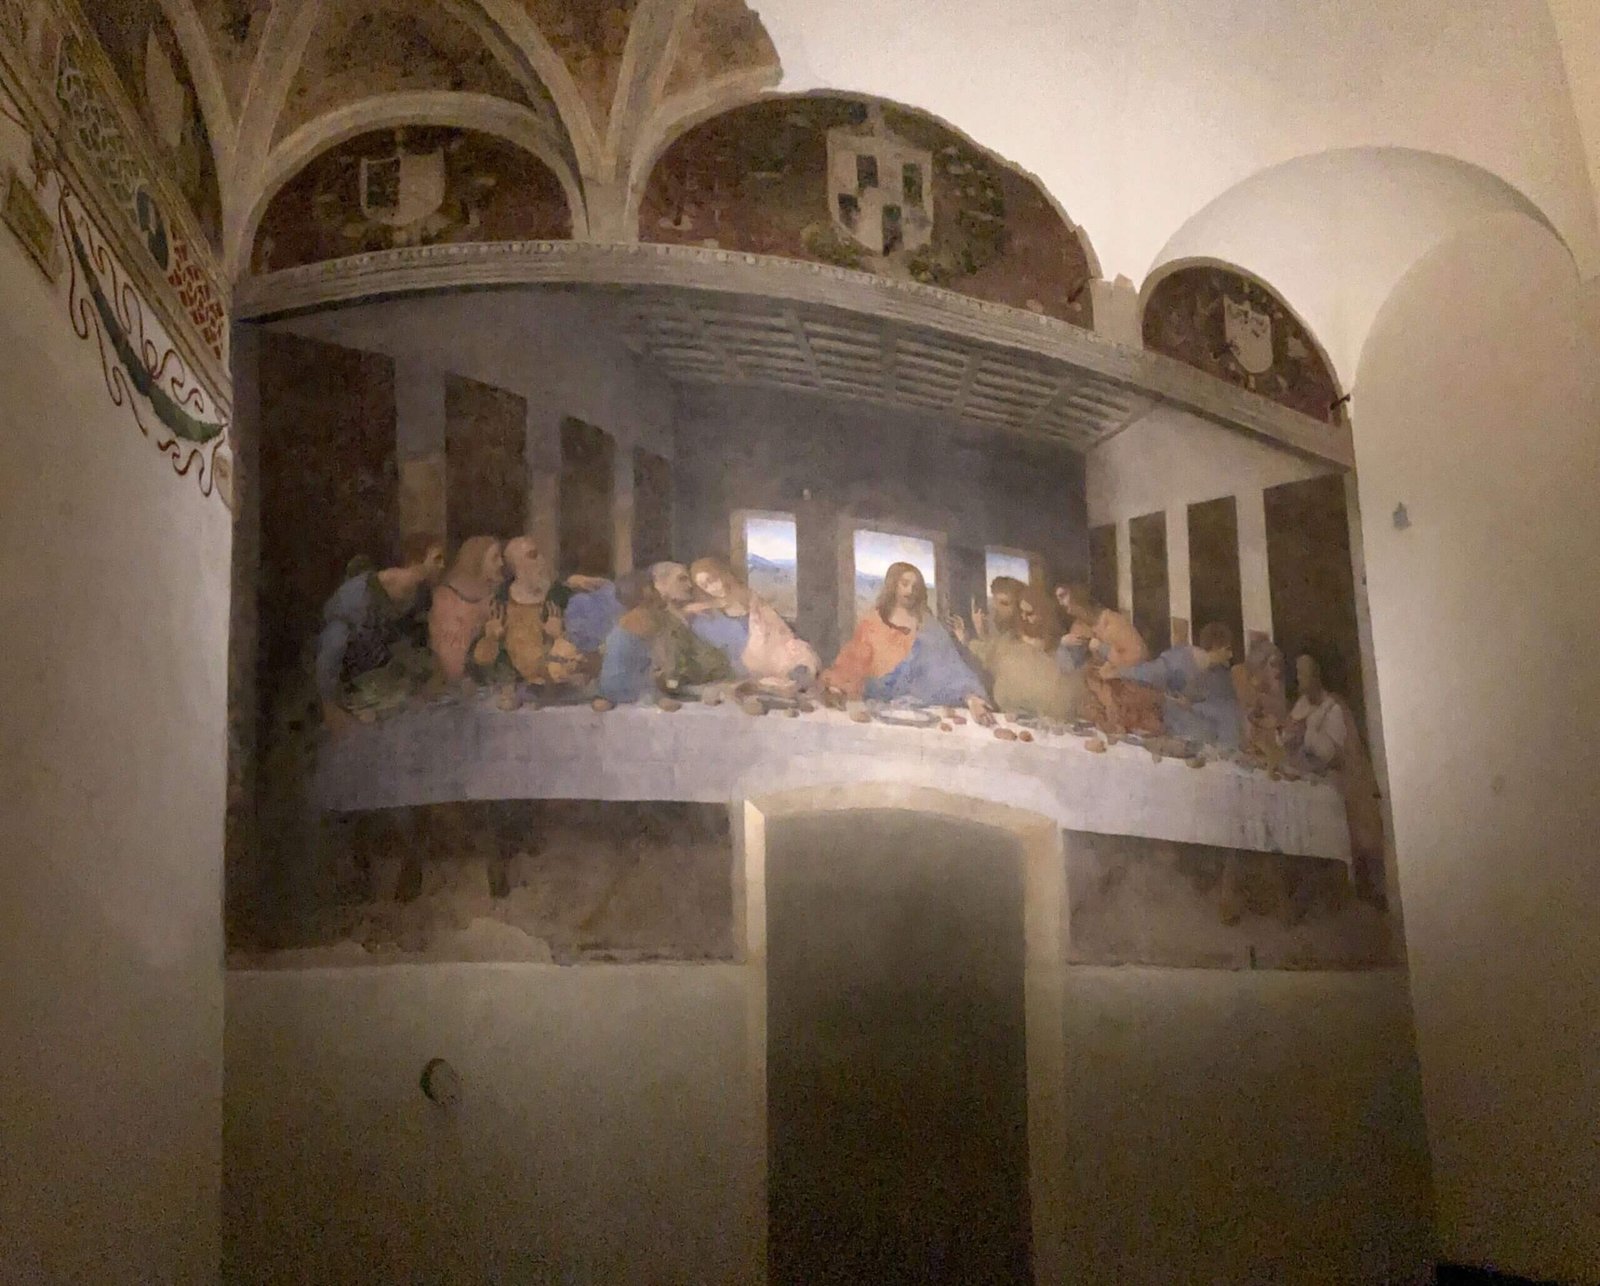 The Last Supper in Milan, Italy, ouritalianjourney.com